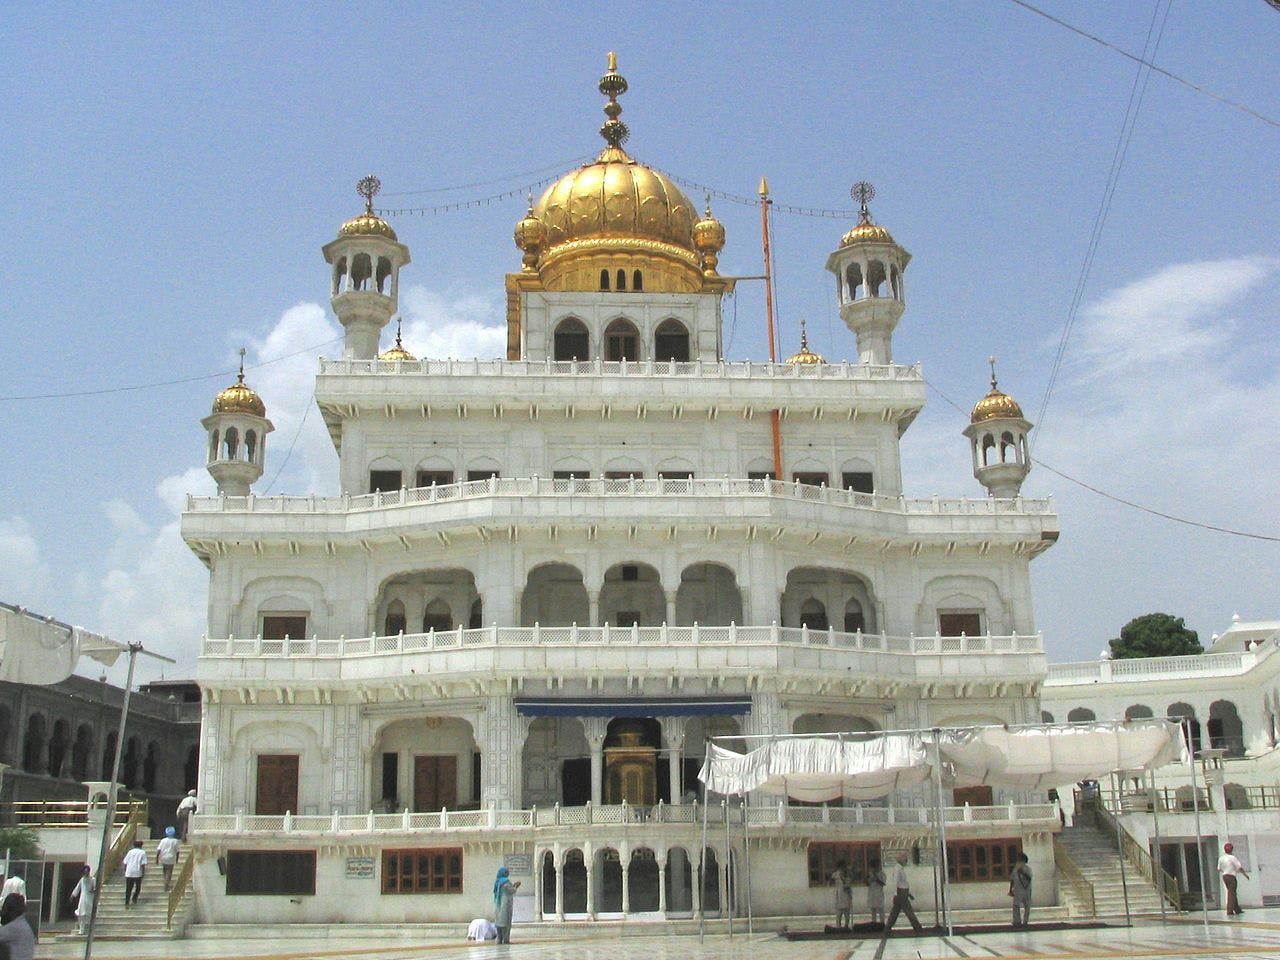 Akal Takht in the Golden Temple complex